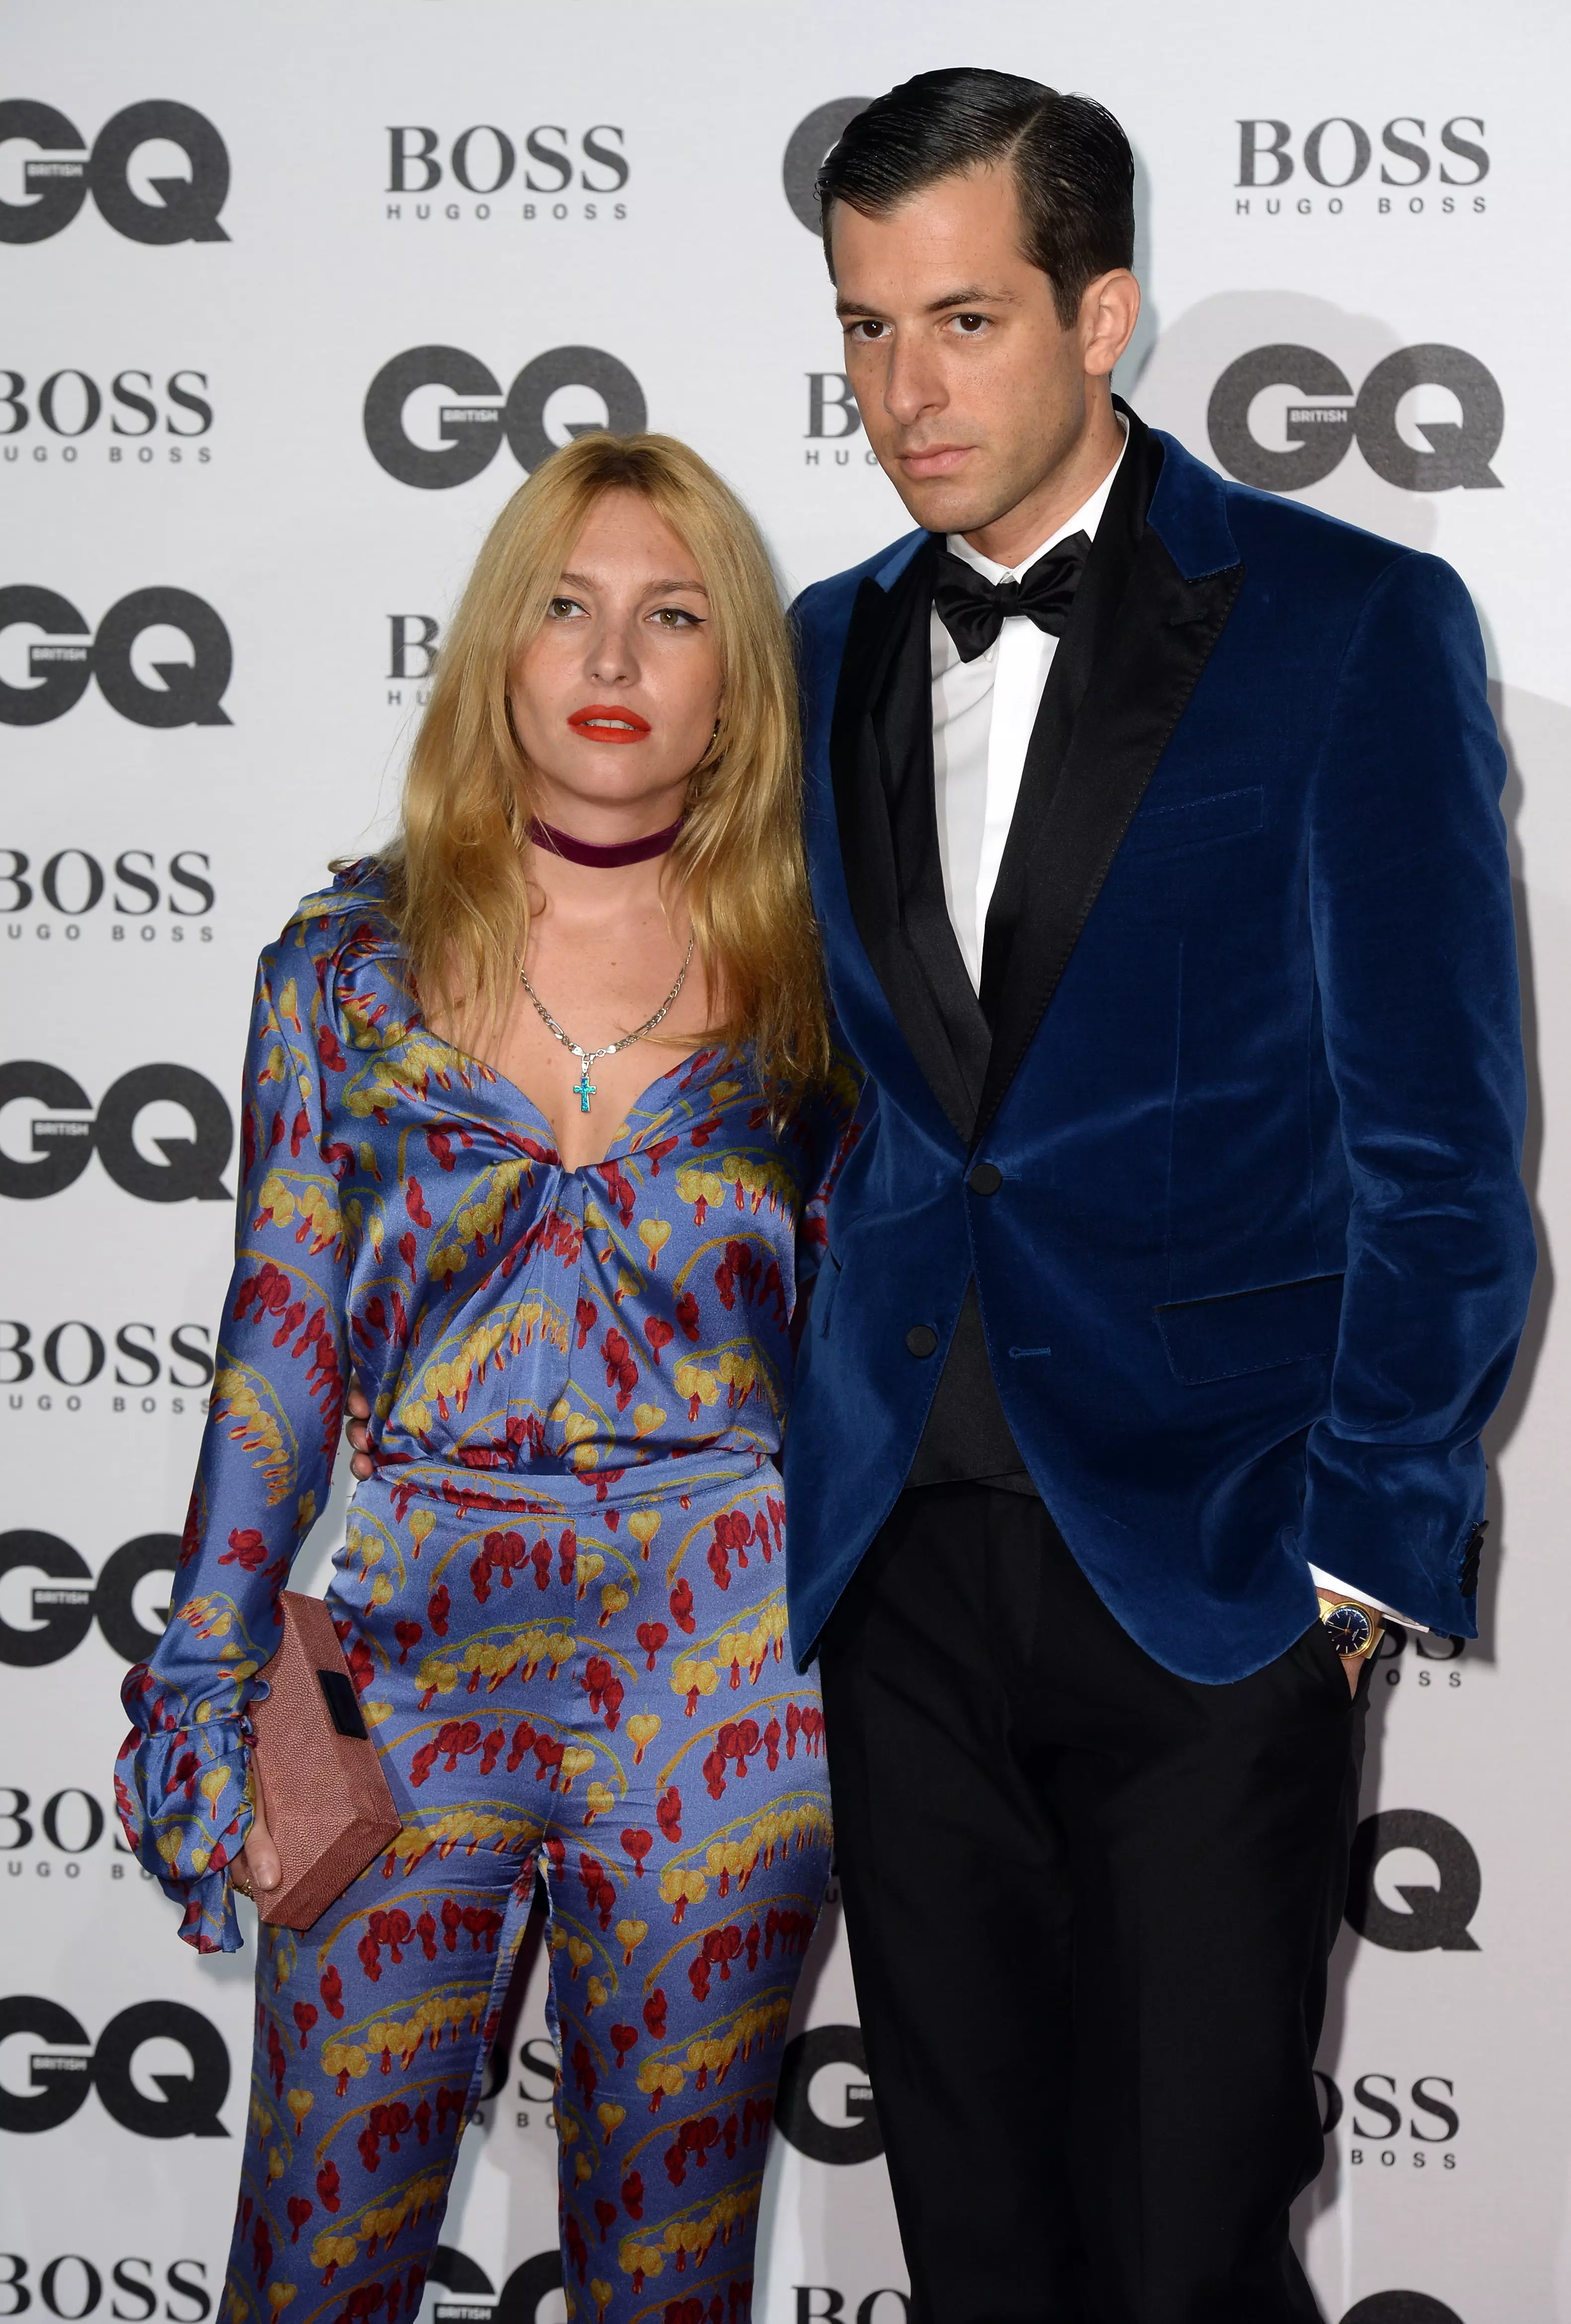 Mark pictured with his ex-wife Joséphine De La Baume in 2016.